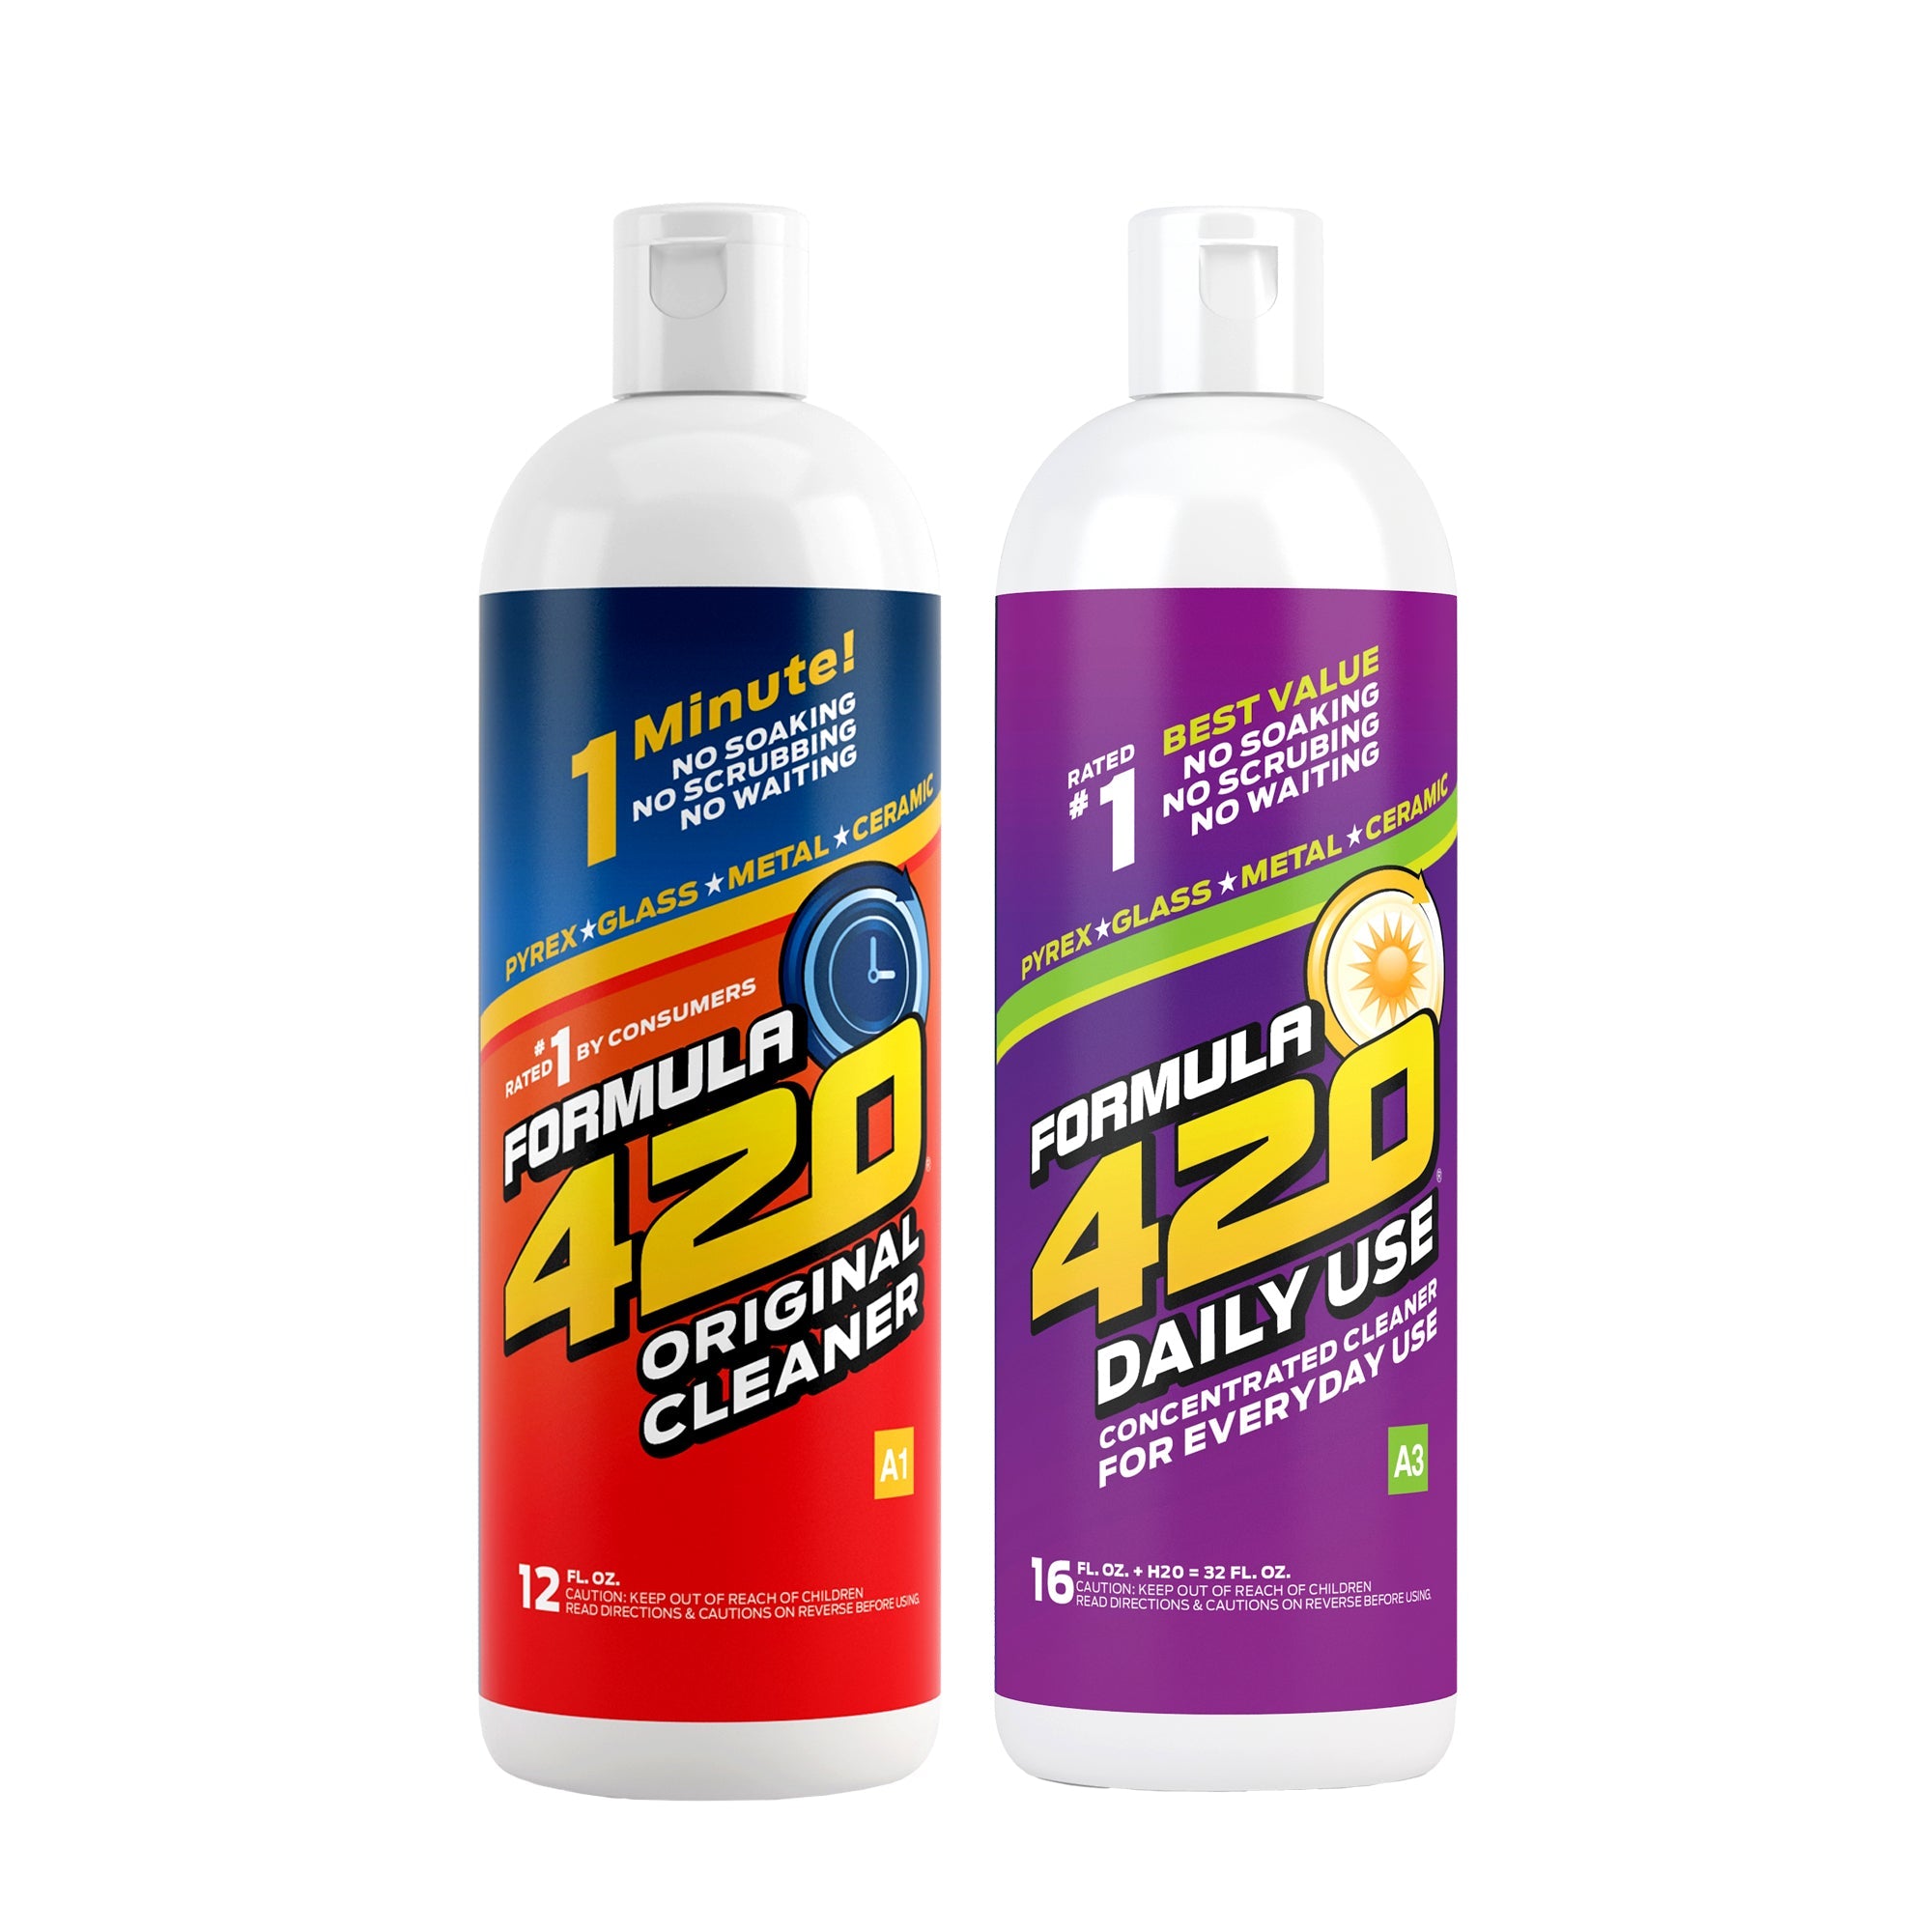 420 Glass Cleaner is available at Dr. Data! — Dr. Data. Premium